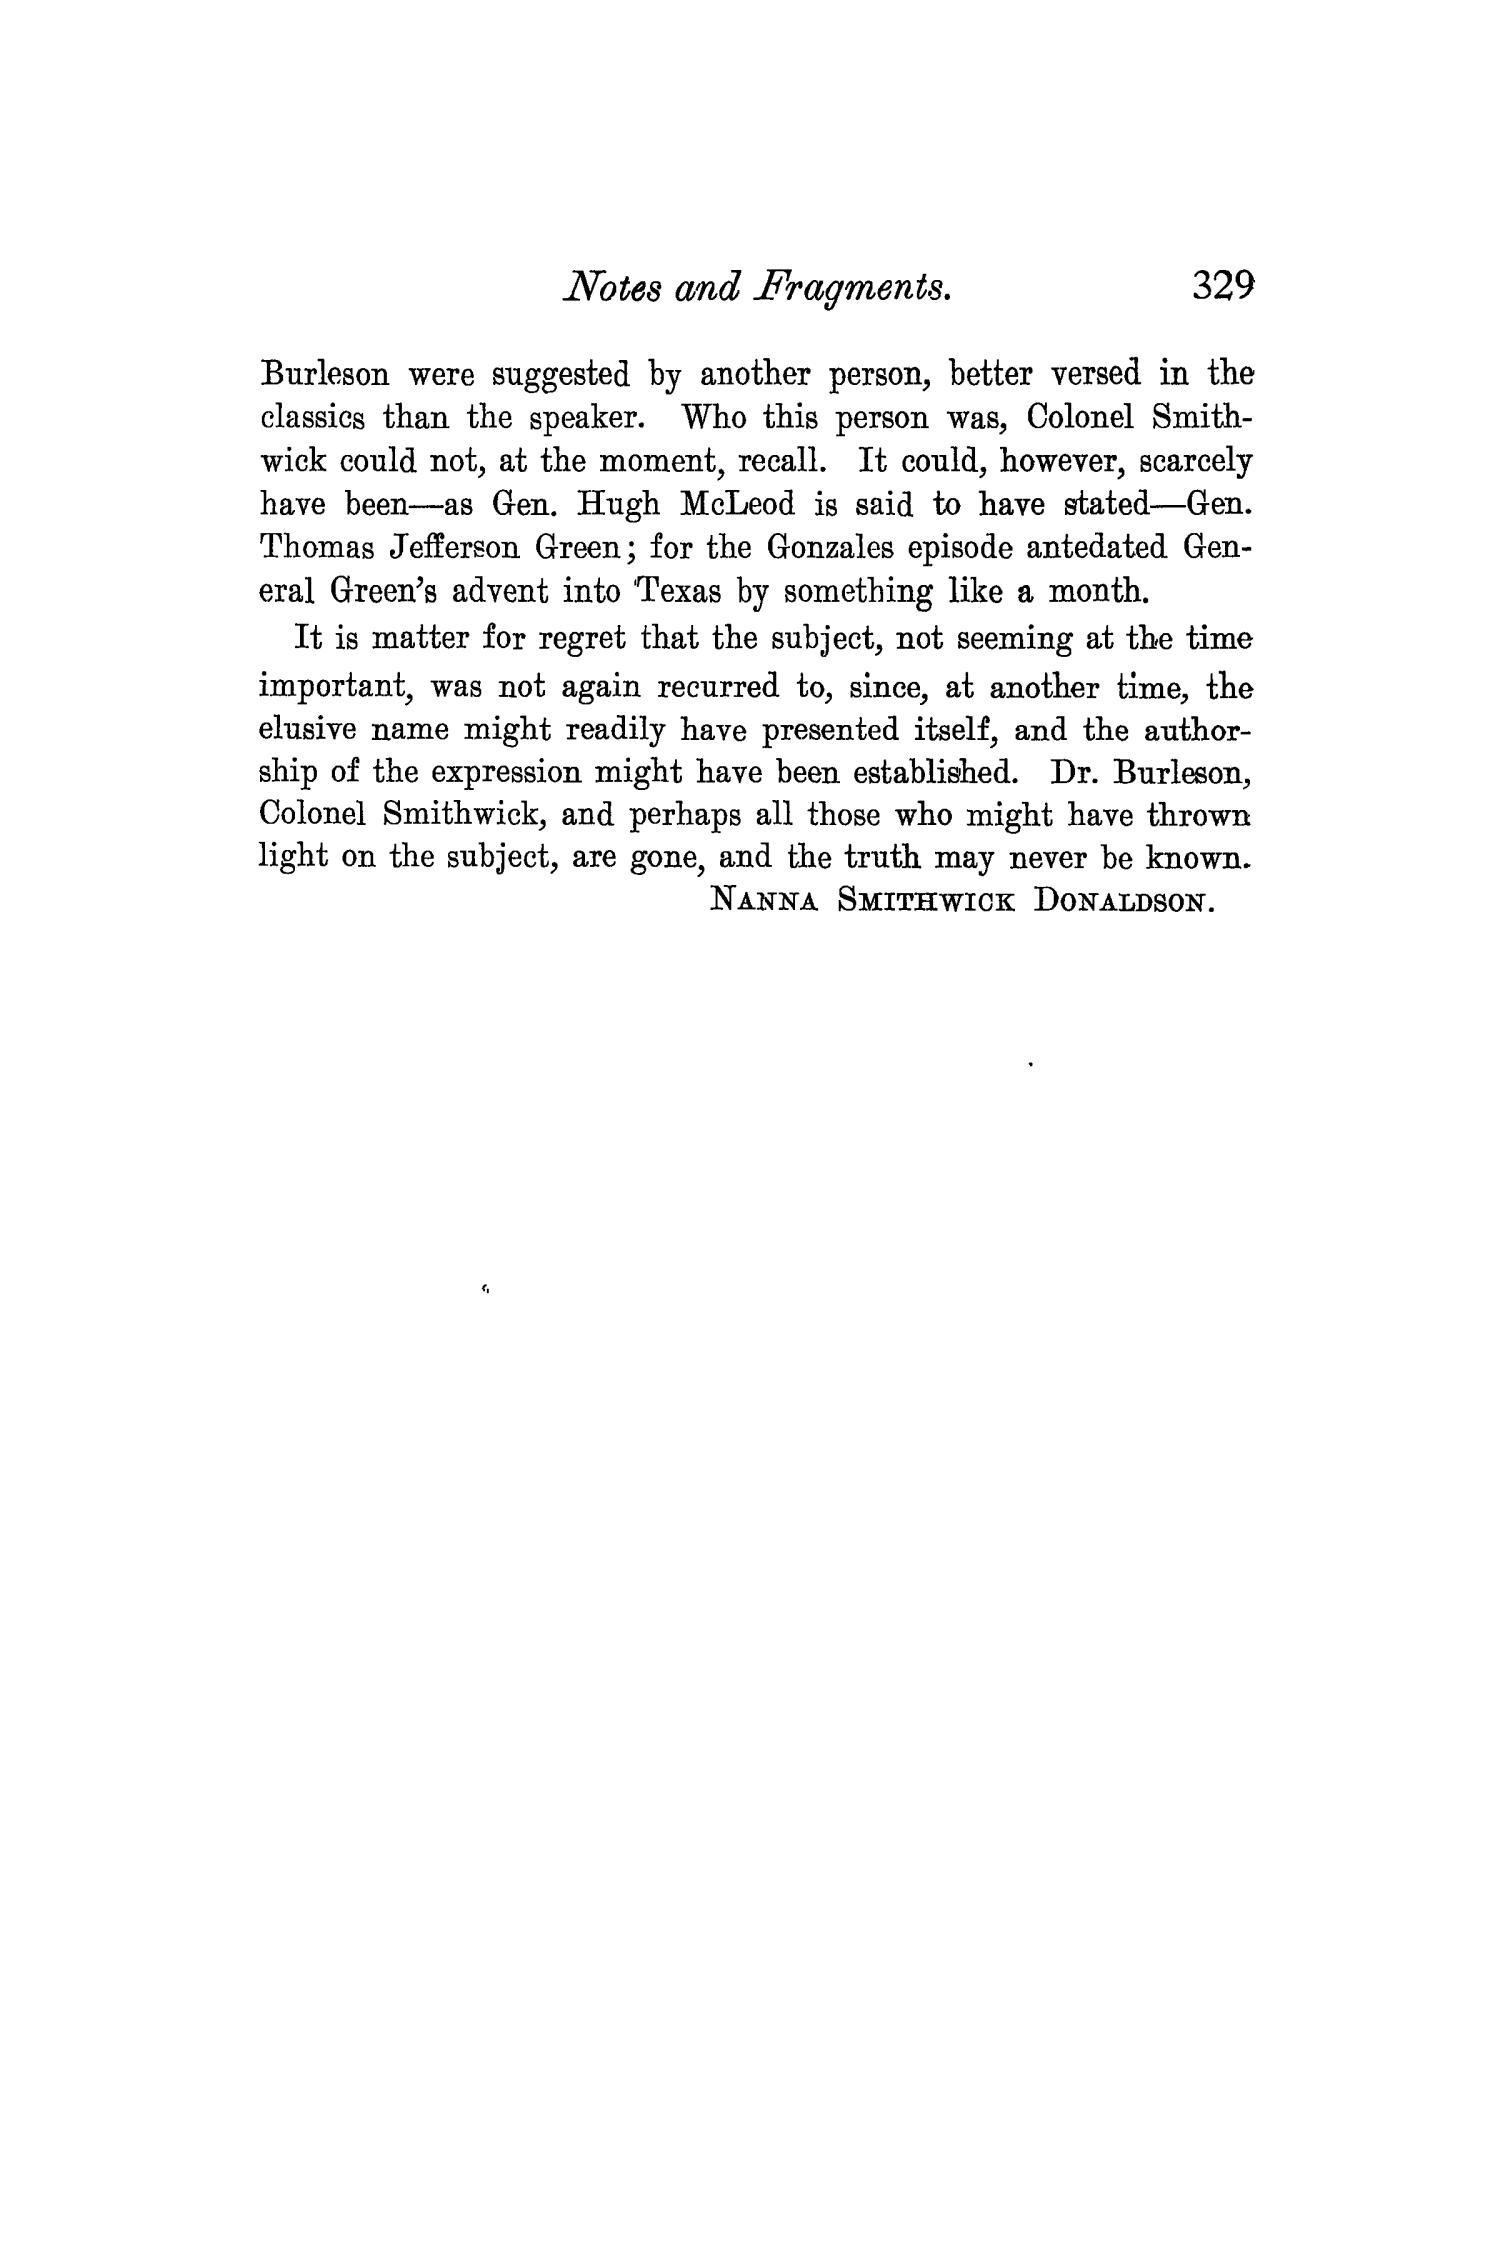 The Quarterly of the Texas State Historical Association, Volume 7, July 1903 - April, 1904
                                                
                                                    329
                                                